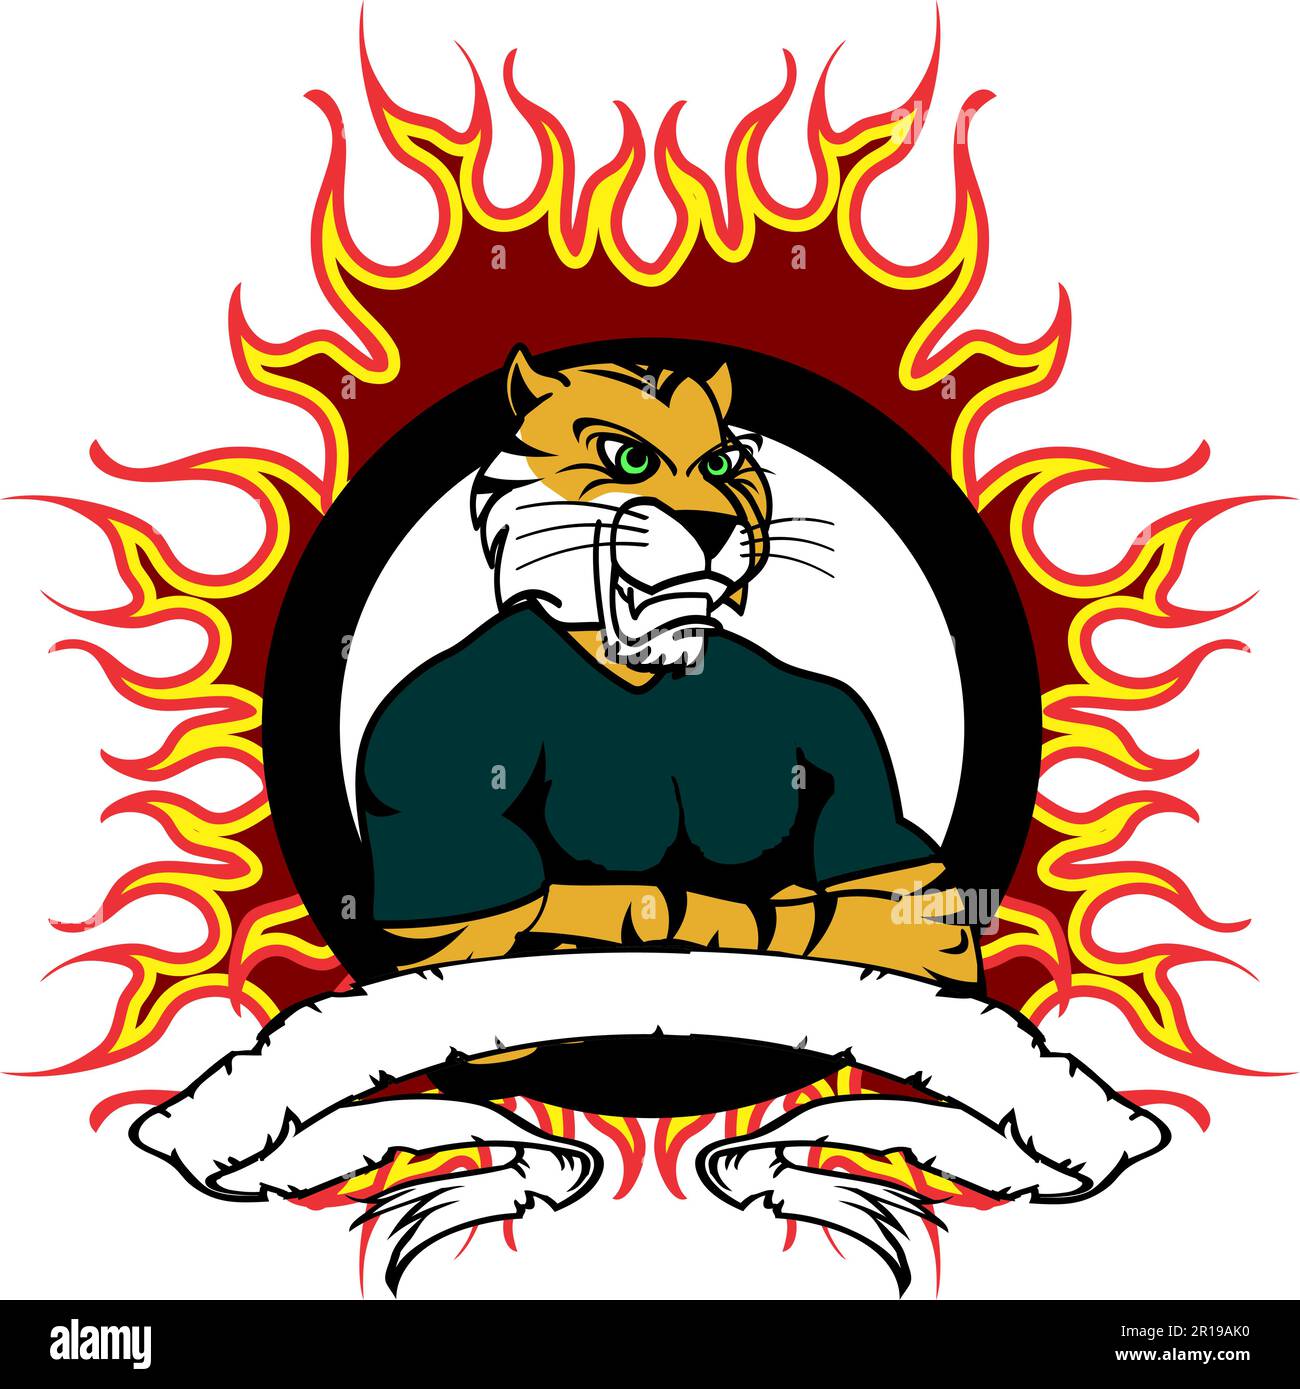 muscle tiger insignia crest shield sticker illustration in vector format Stock Vector